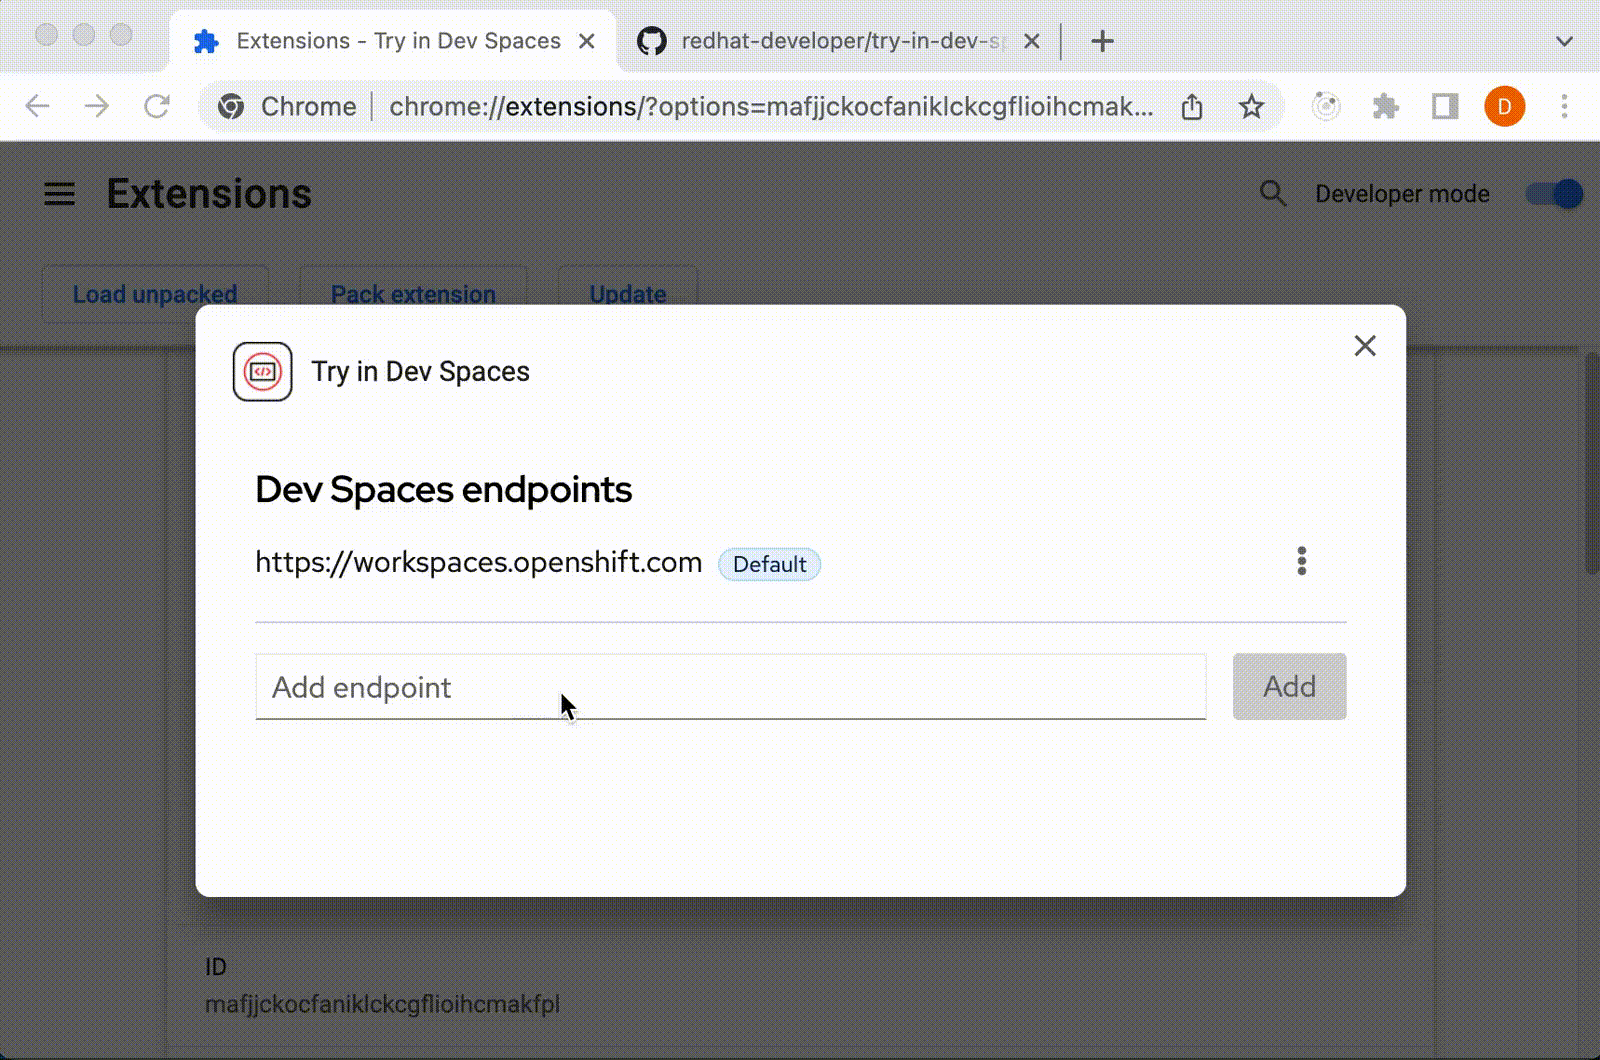 A demo of how to use the Dev Spaces button, adding new Dev Spaces endpoint and creating a workspace.